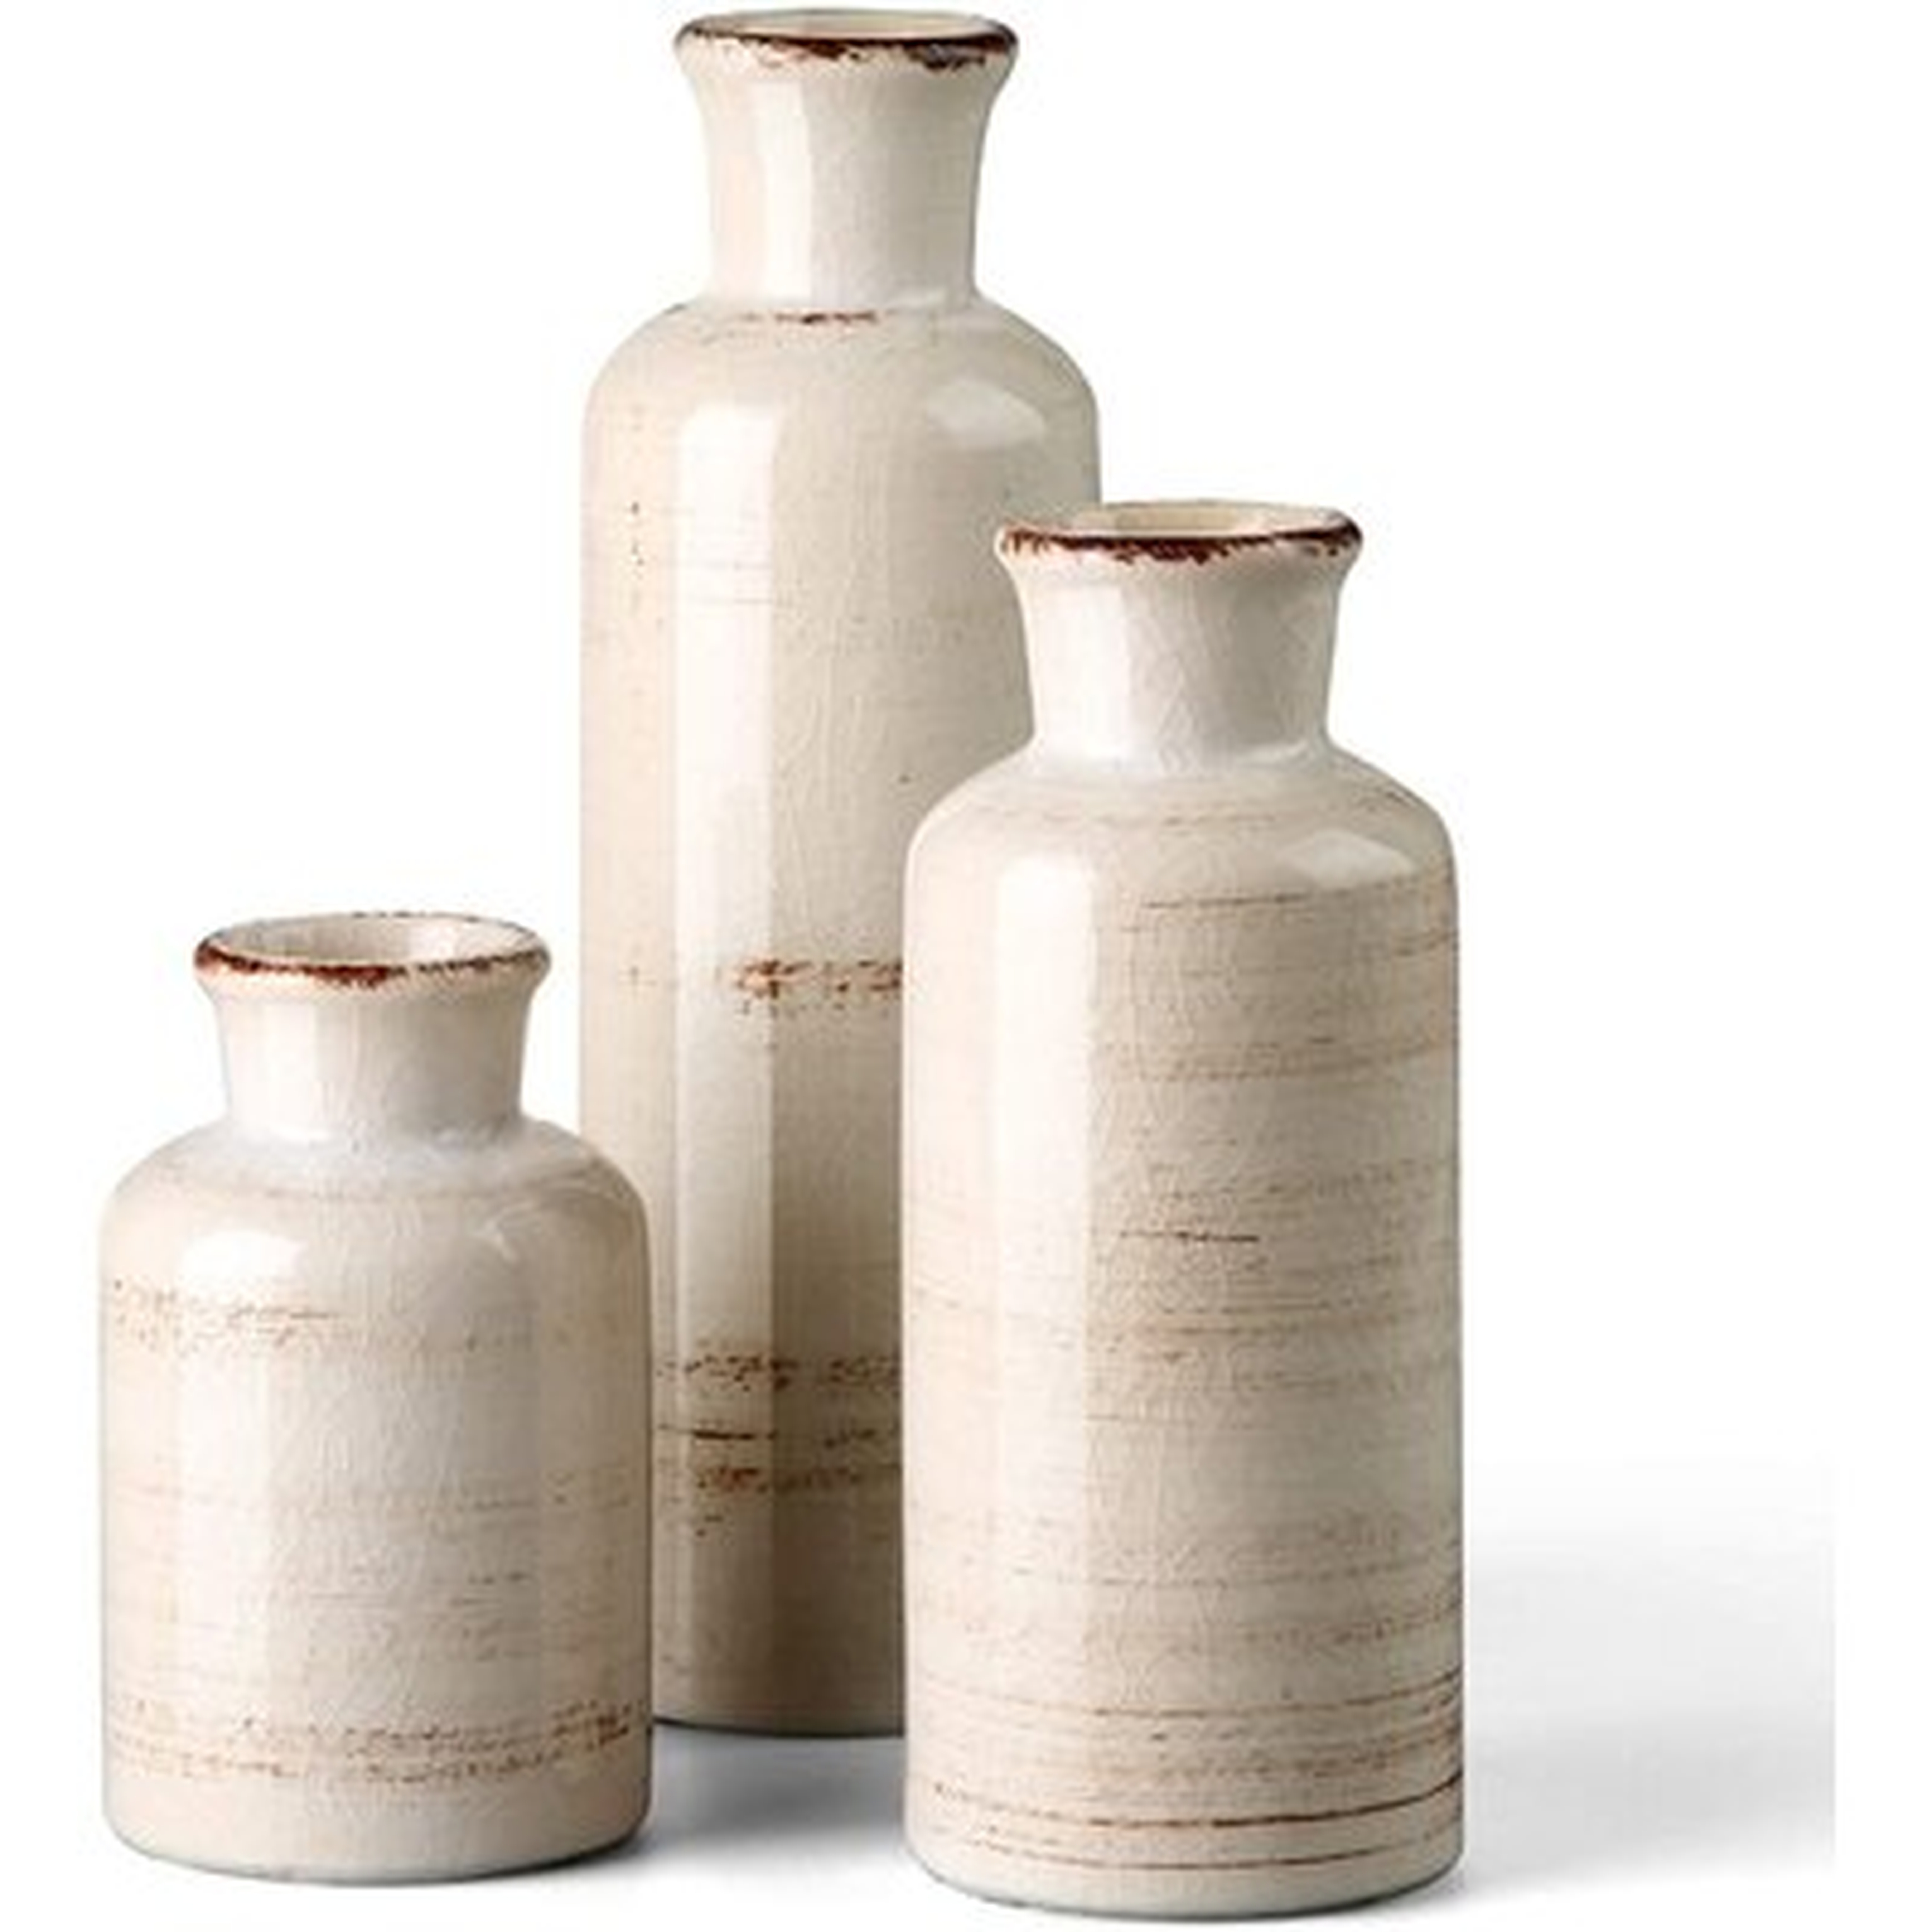 Ceramic Rustic Vase For Home Decor, Set Of 3 Decorative Vases For Table, Retro White, Kitchen, Living Room,Great For Adding A Decorative Touch To Any Room's Decor. - Wayfair